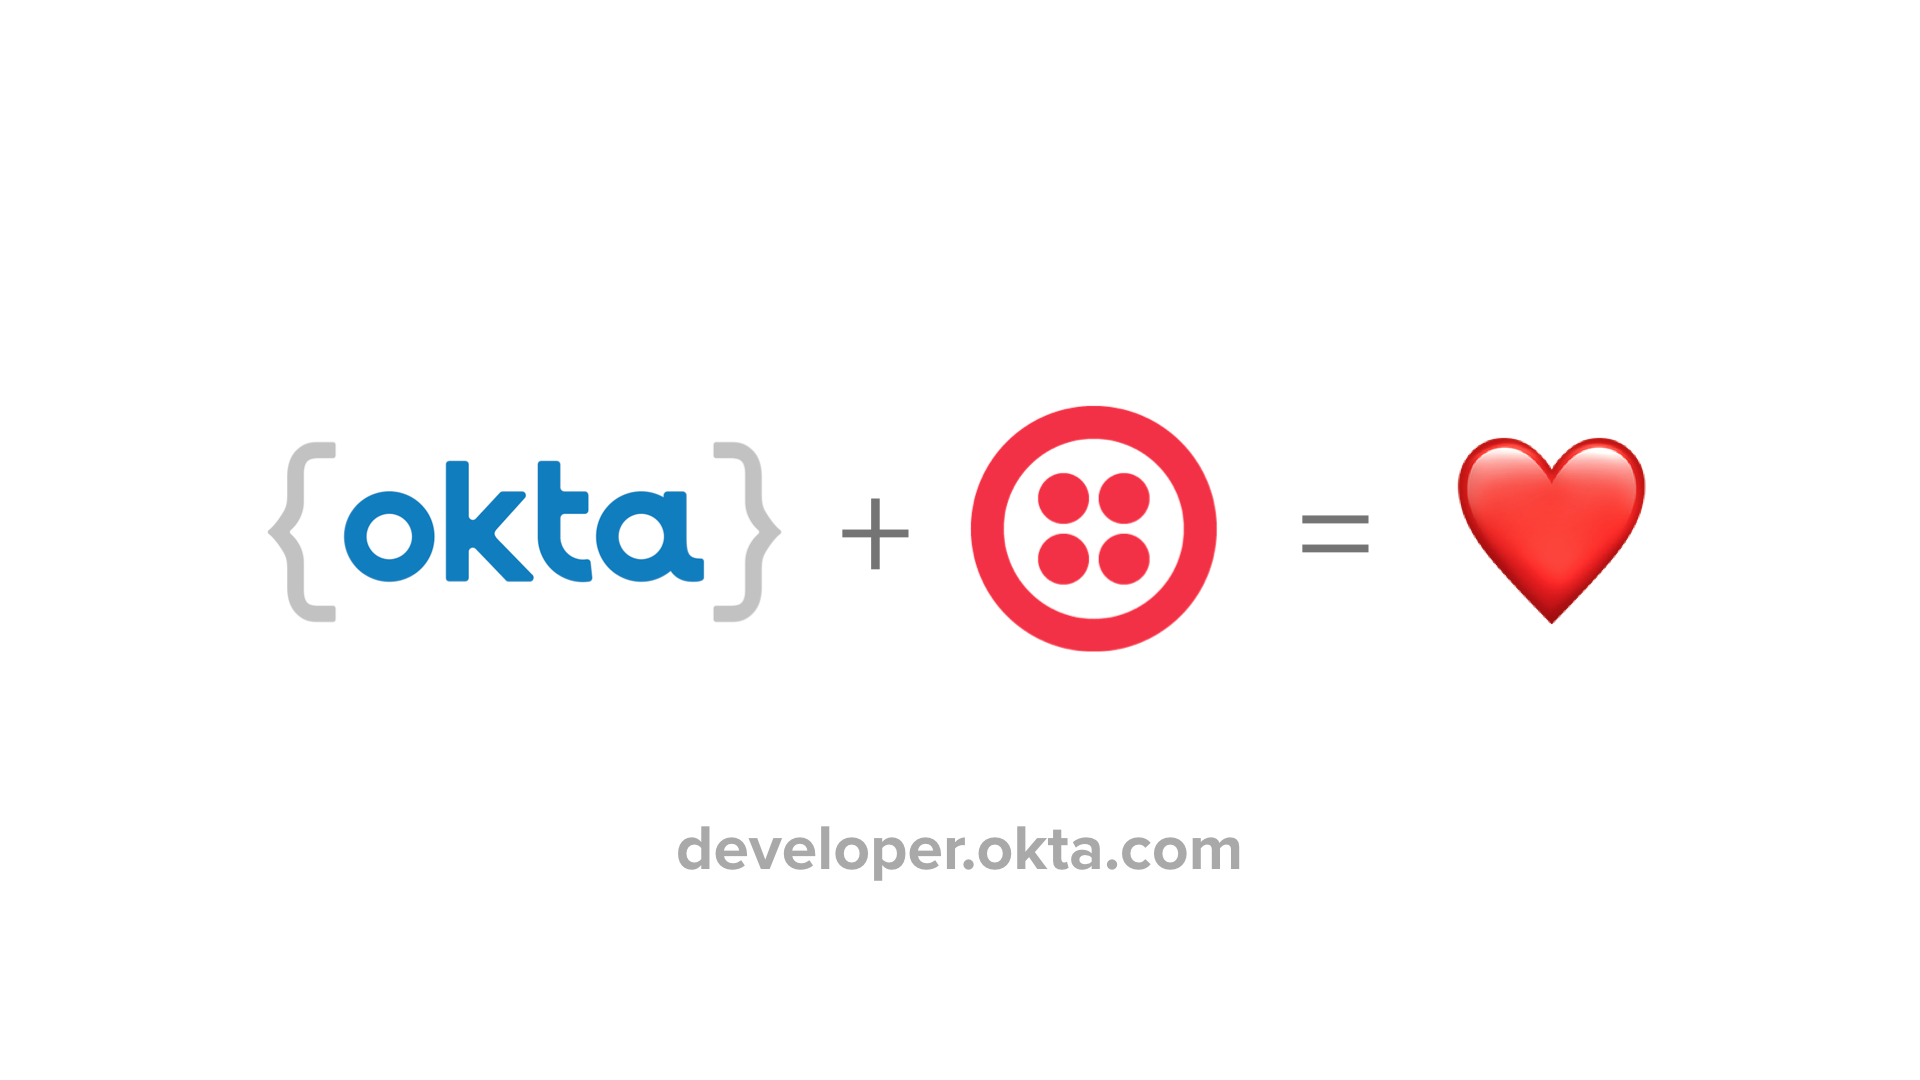 Build a Phone System for Your Company With Twilio, Okta, and JavaScript